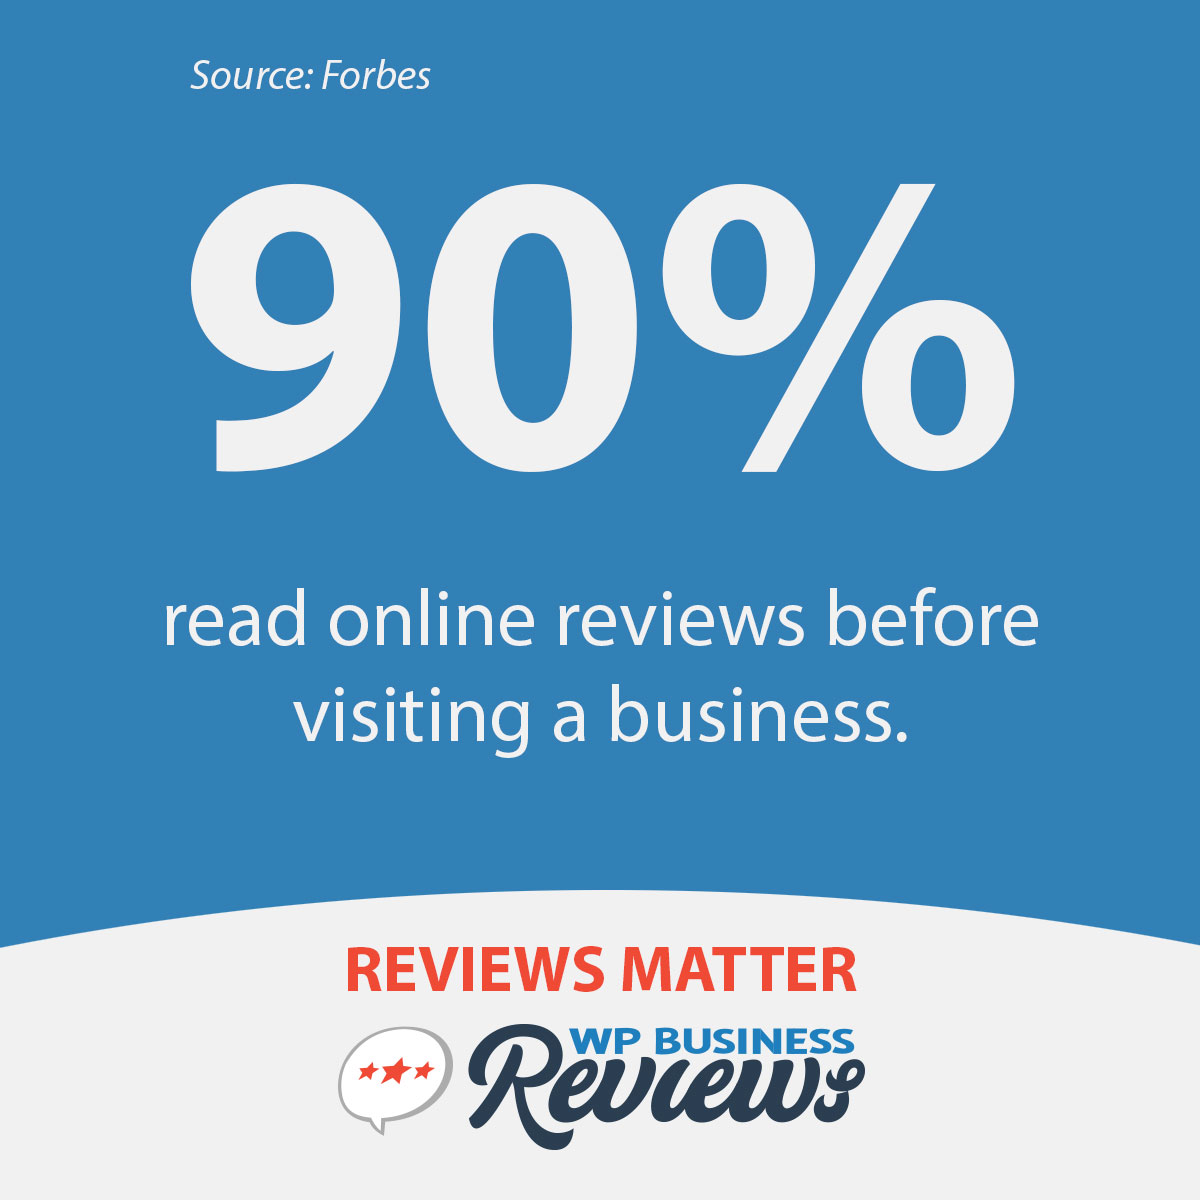 90% of people read online reviews before visiting a business, says Podium.